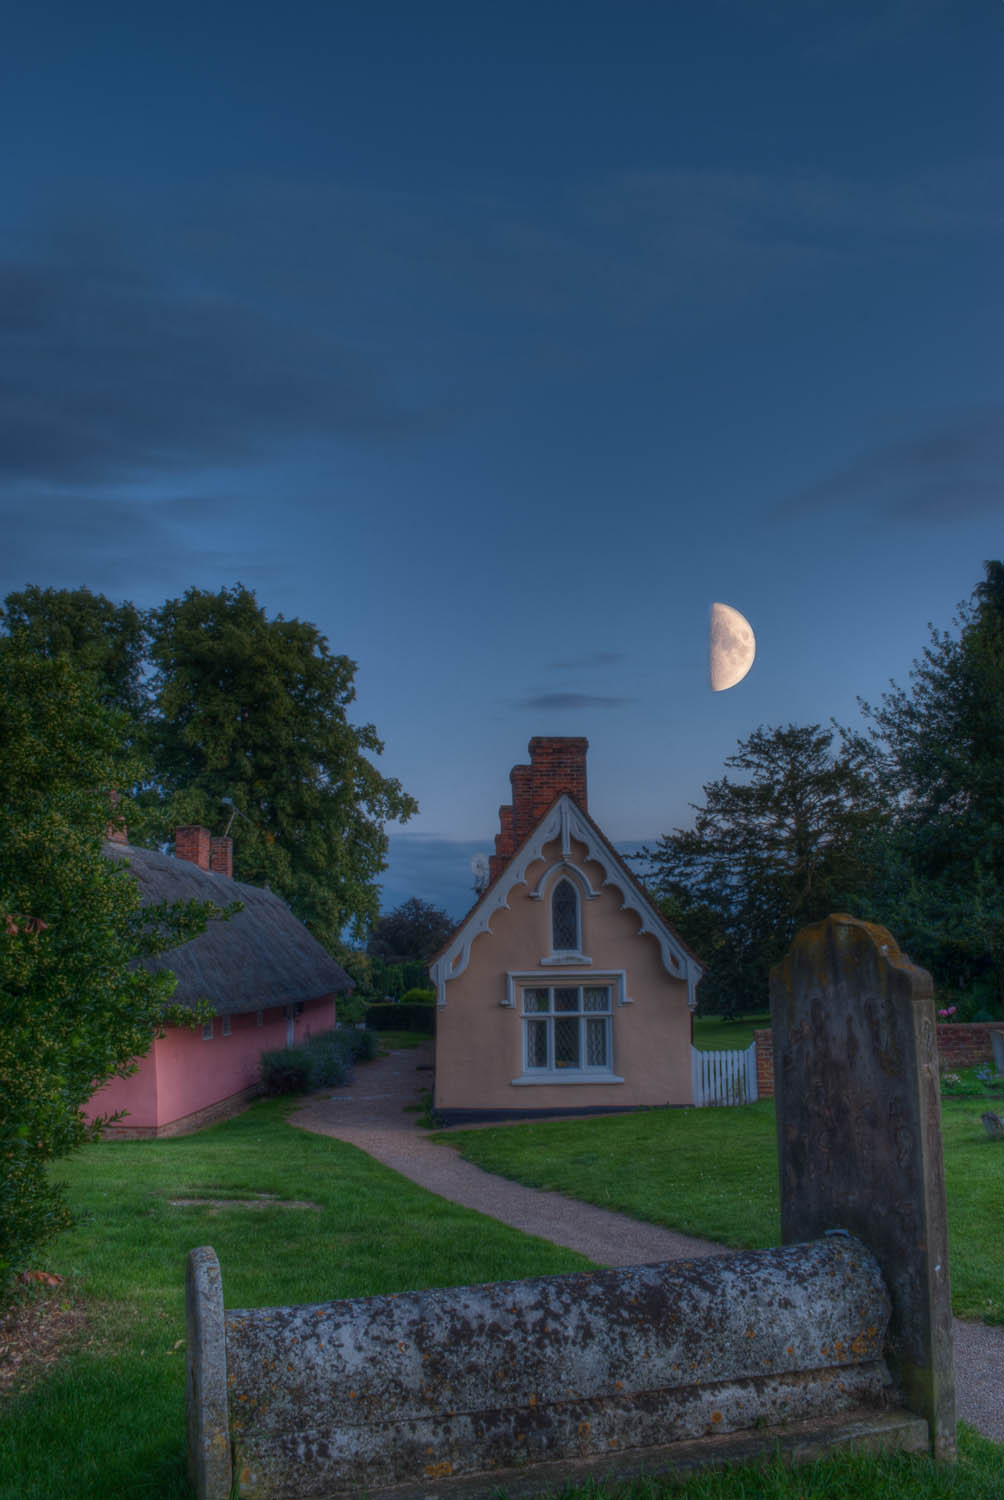 Almshouses and the moon at Thaxted